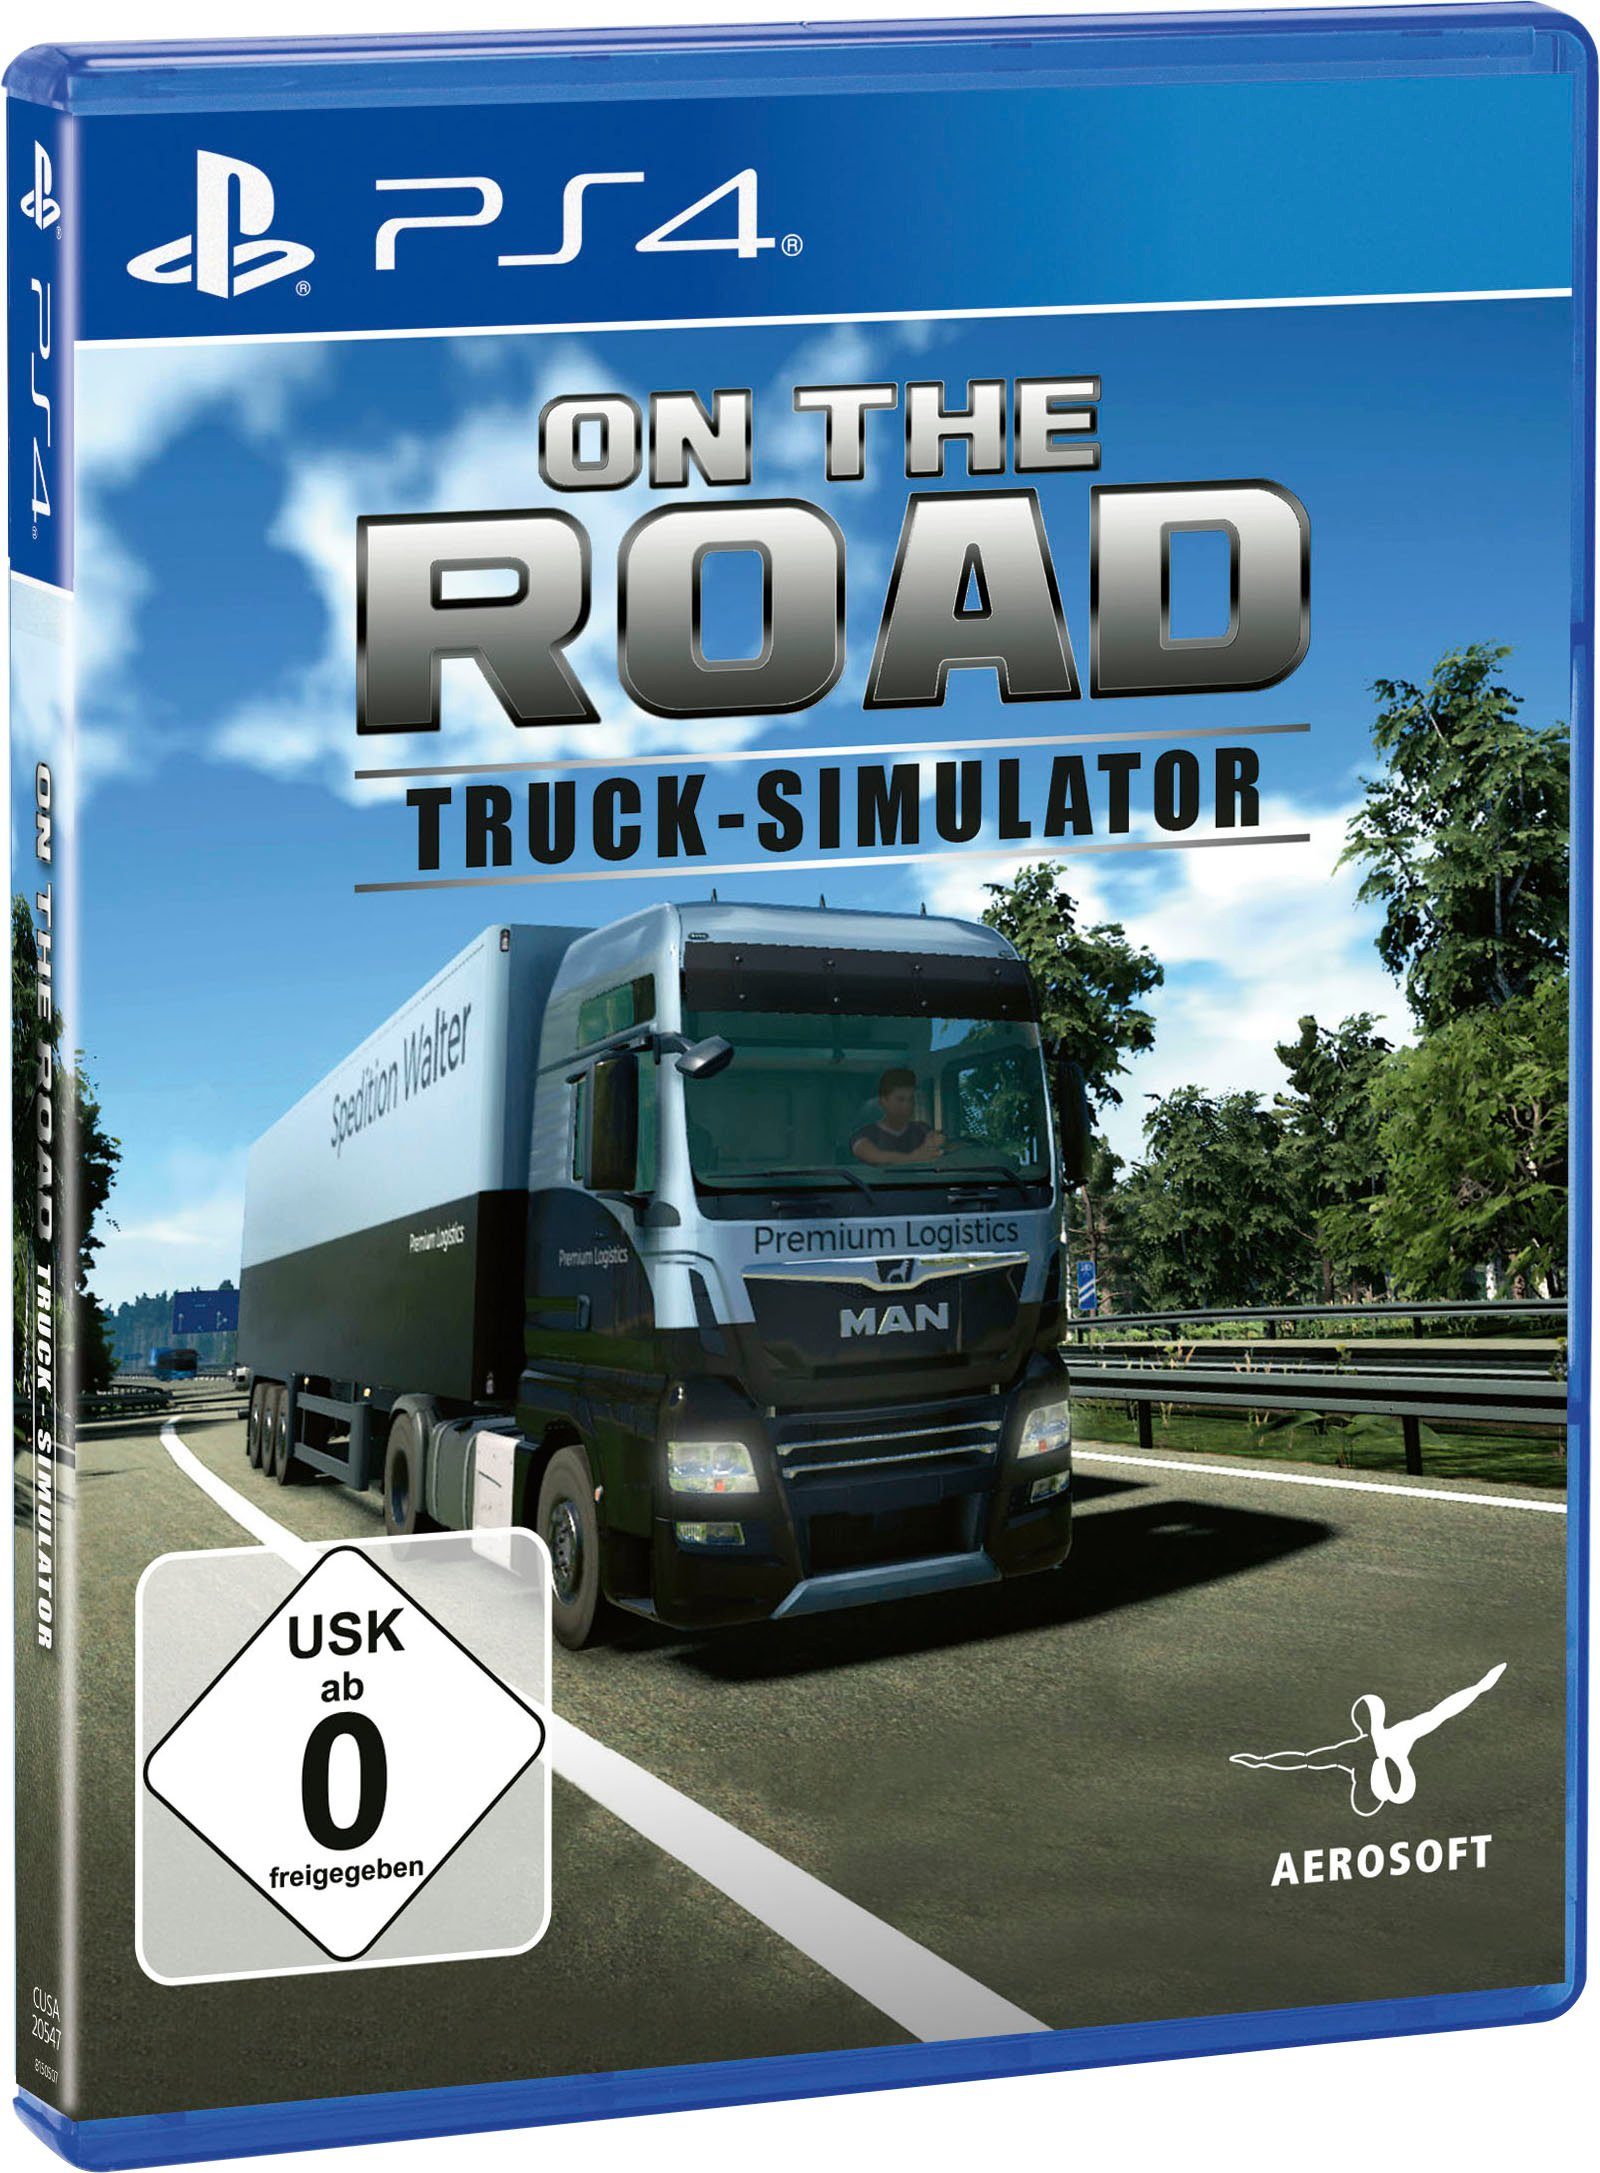 4 On Simulator PlayStation Truck - the Road